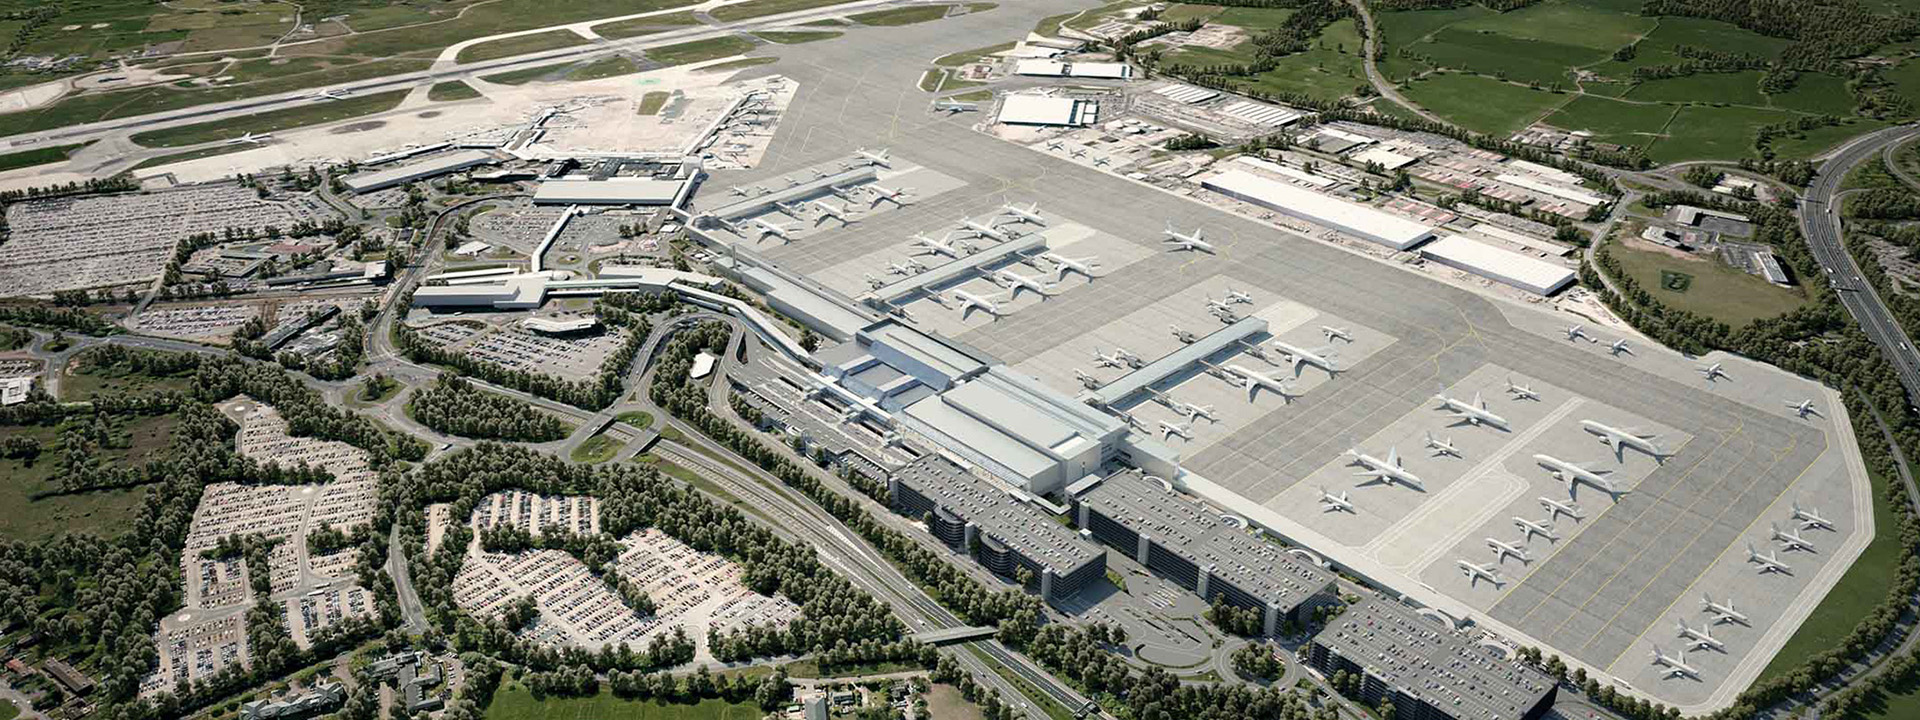 Recent Expansion of Terminal 2 at Manchester Airport